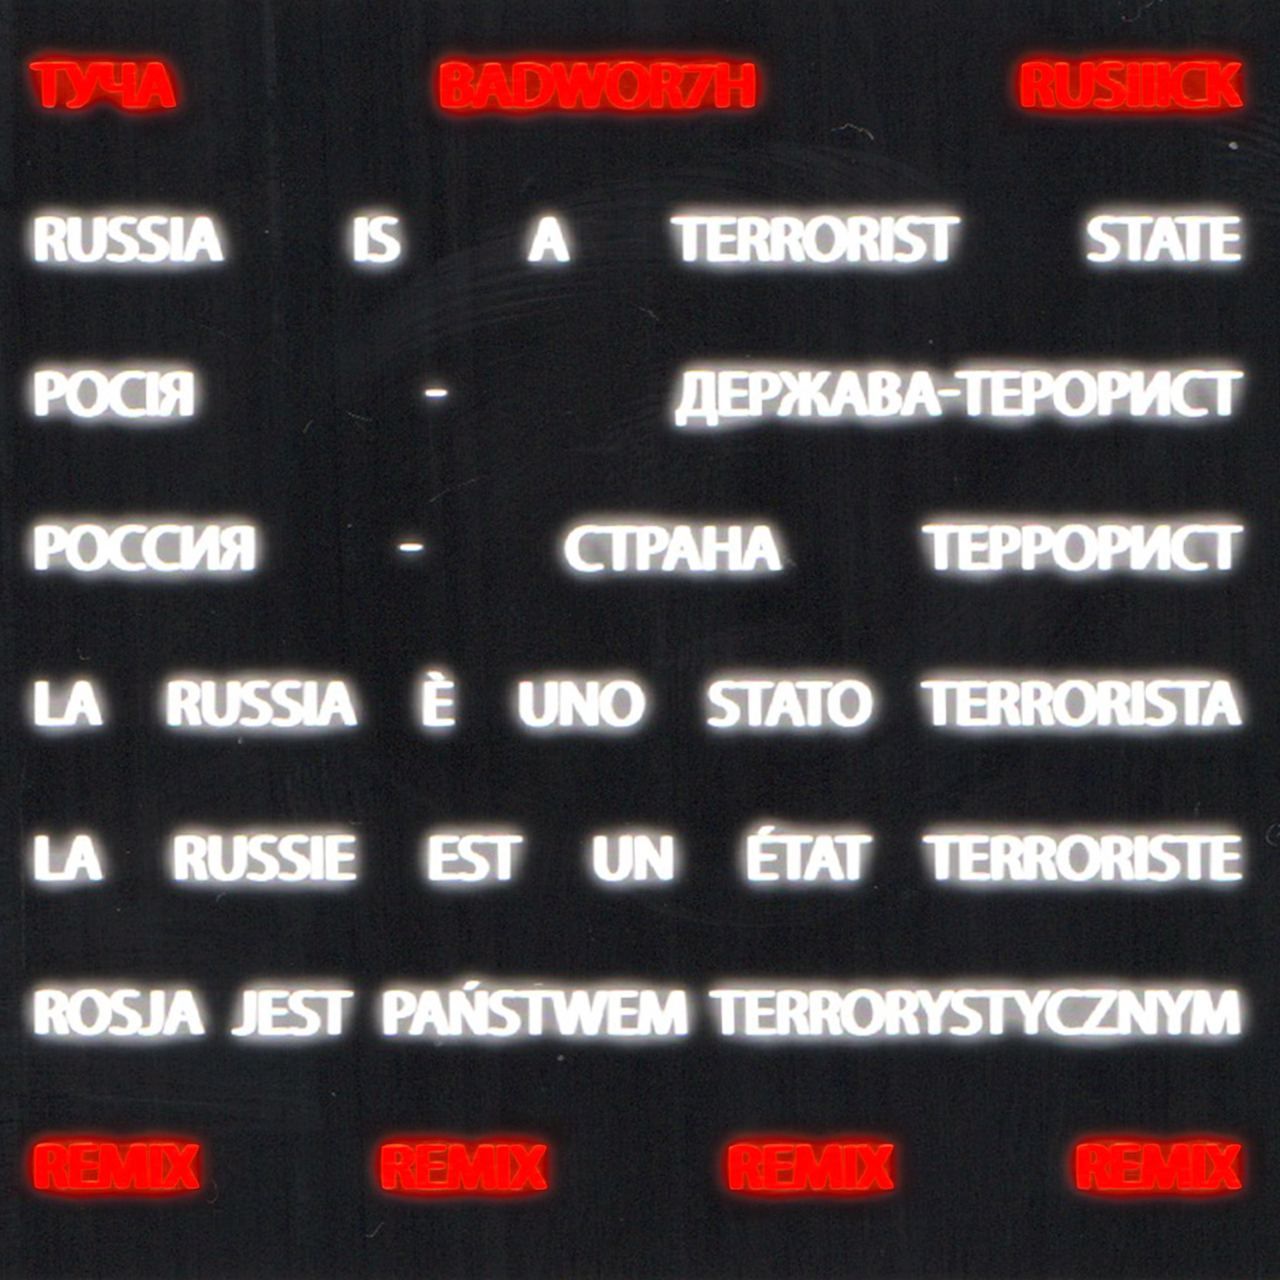 Hent ТУЧА – russia is a terrorist state (BADWOR7H Remix) - feat. RUSIIICK